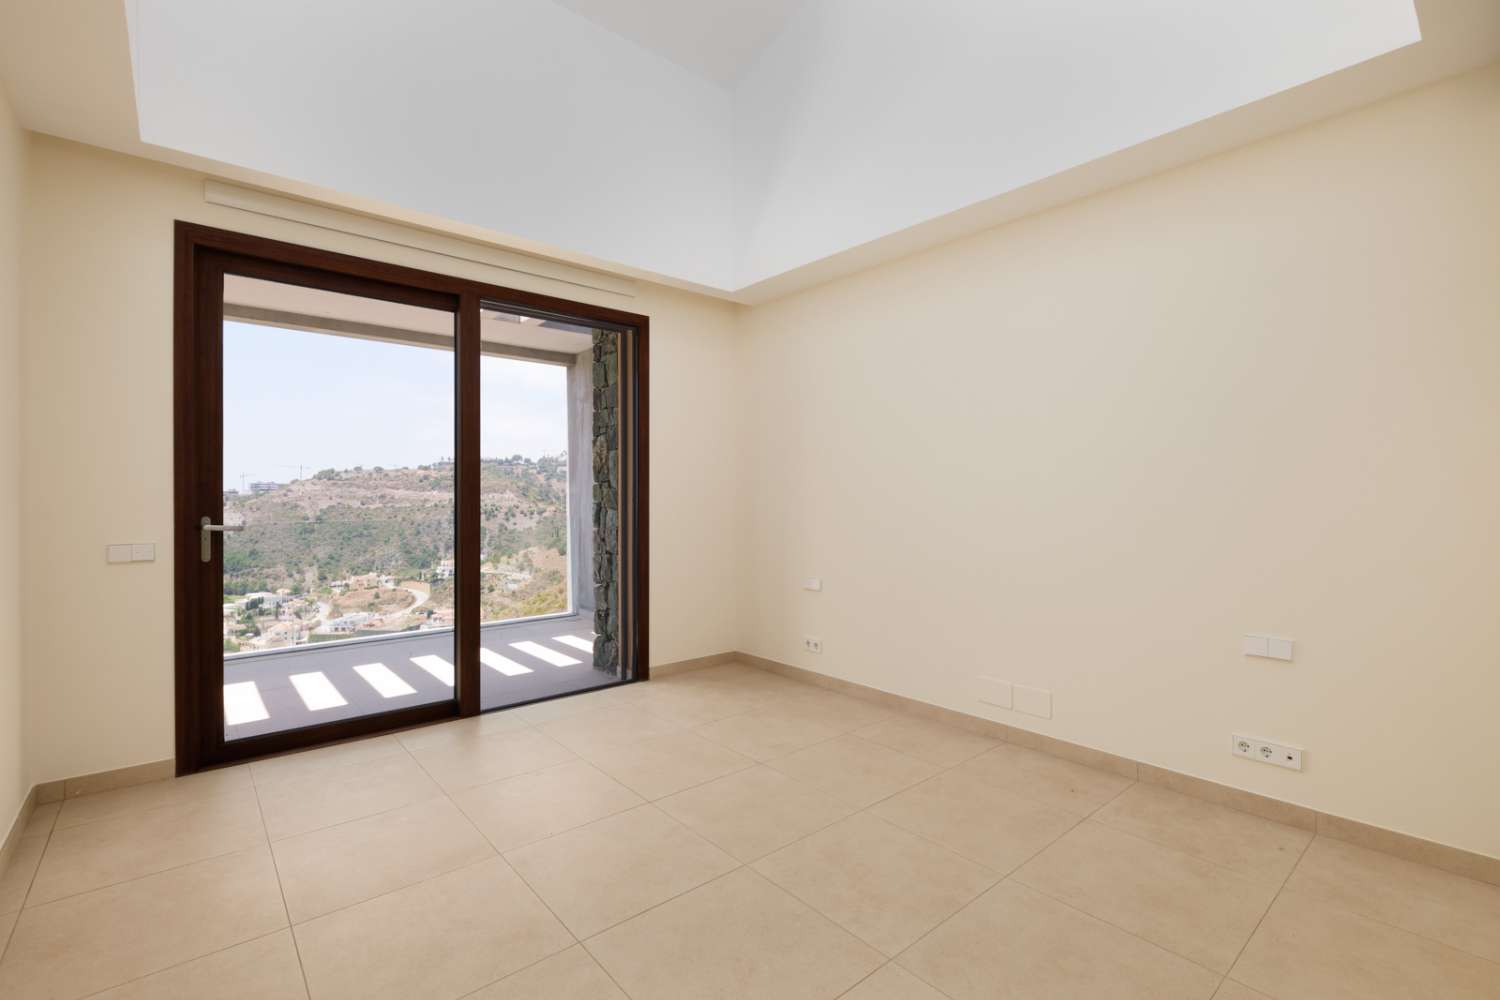 SOLD! BEAUTIFUL BRAND NEW PENTHOUSE IN REAL DE LA QUINTA